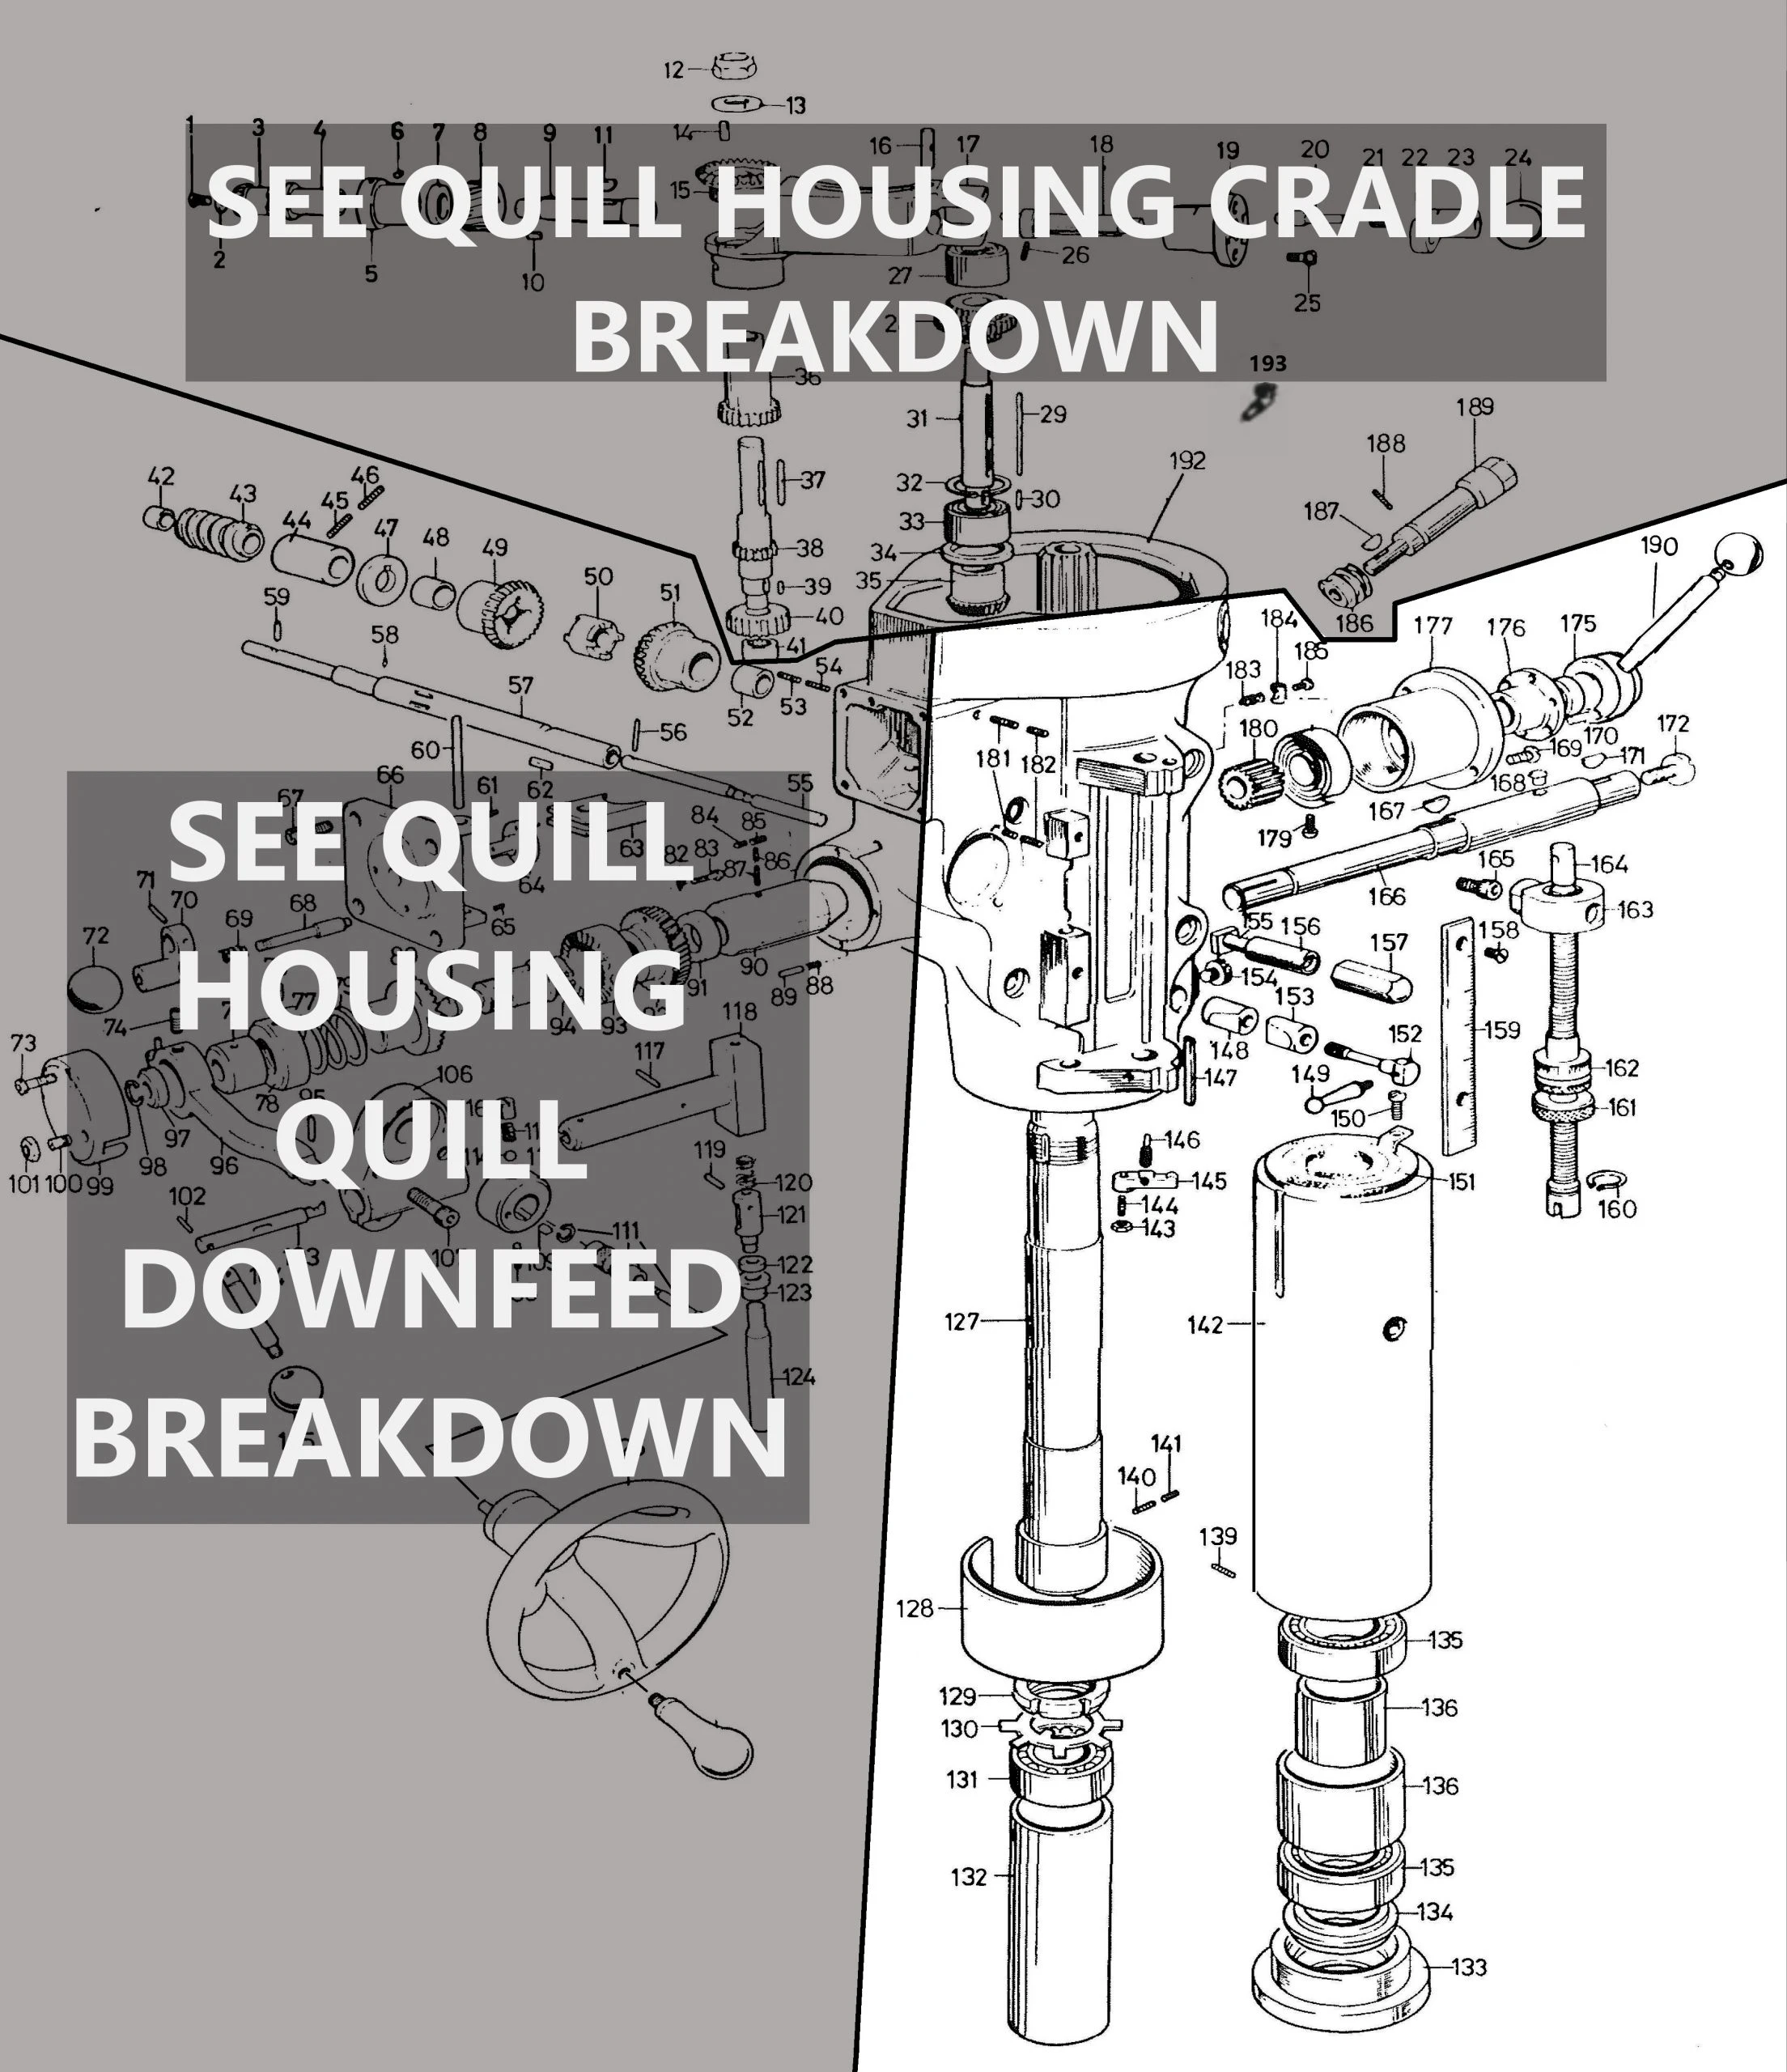 Quill Housing – SpindleQuill